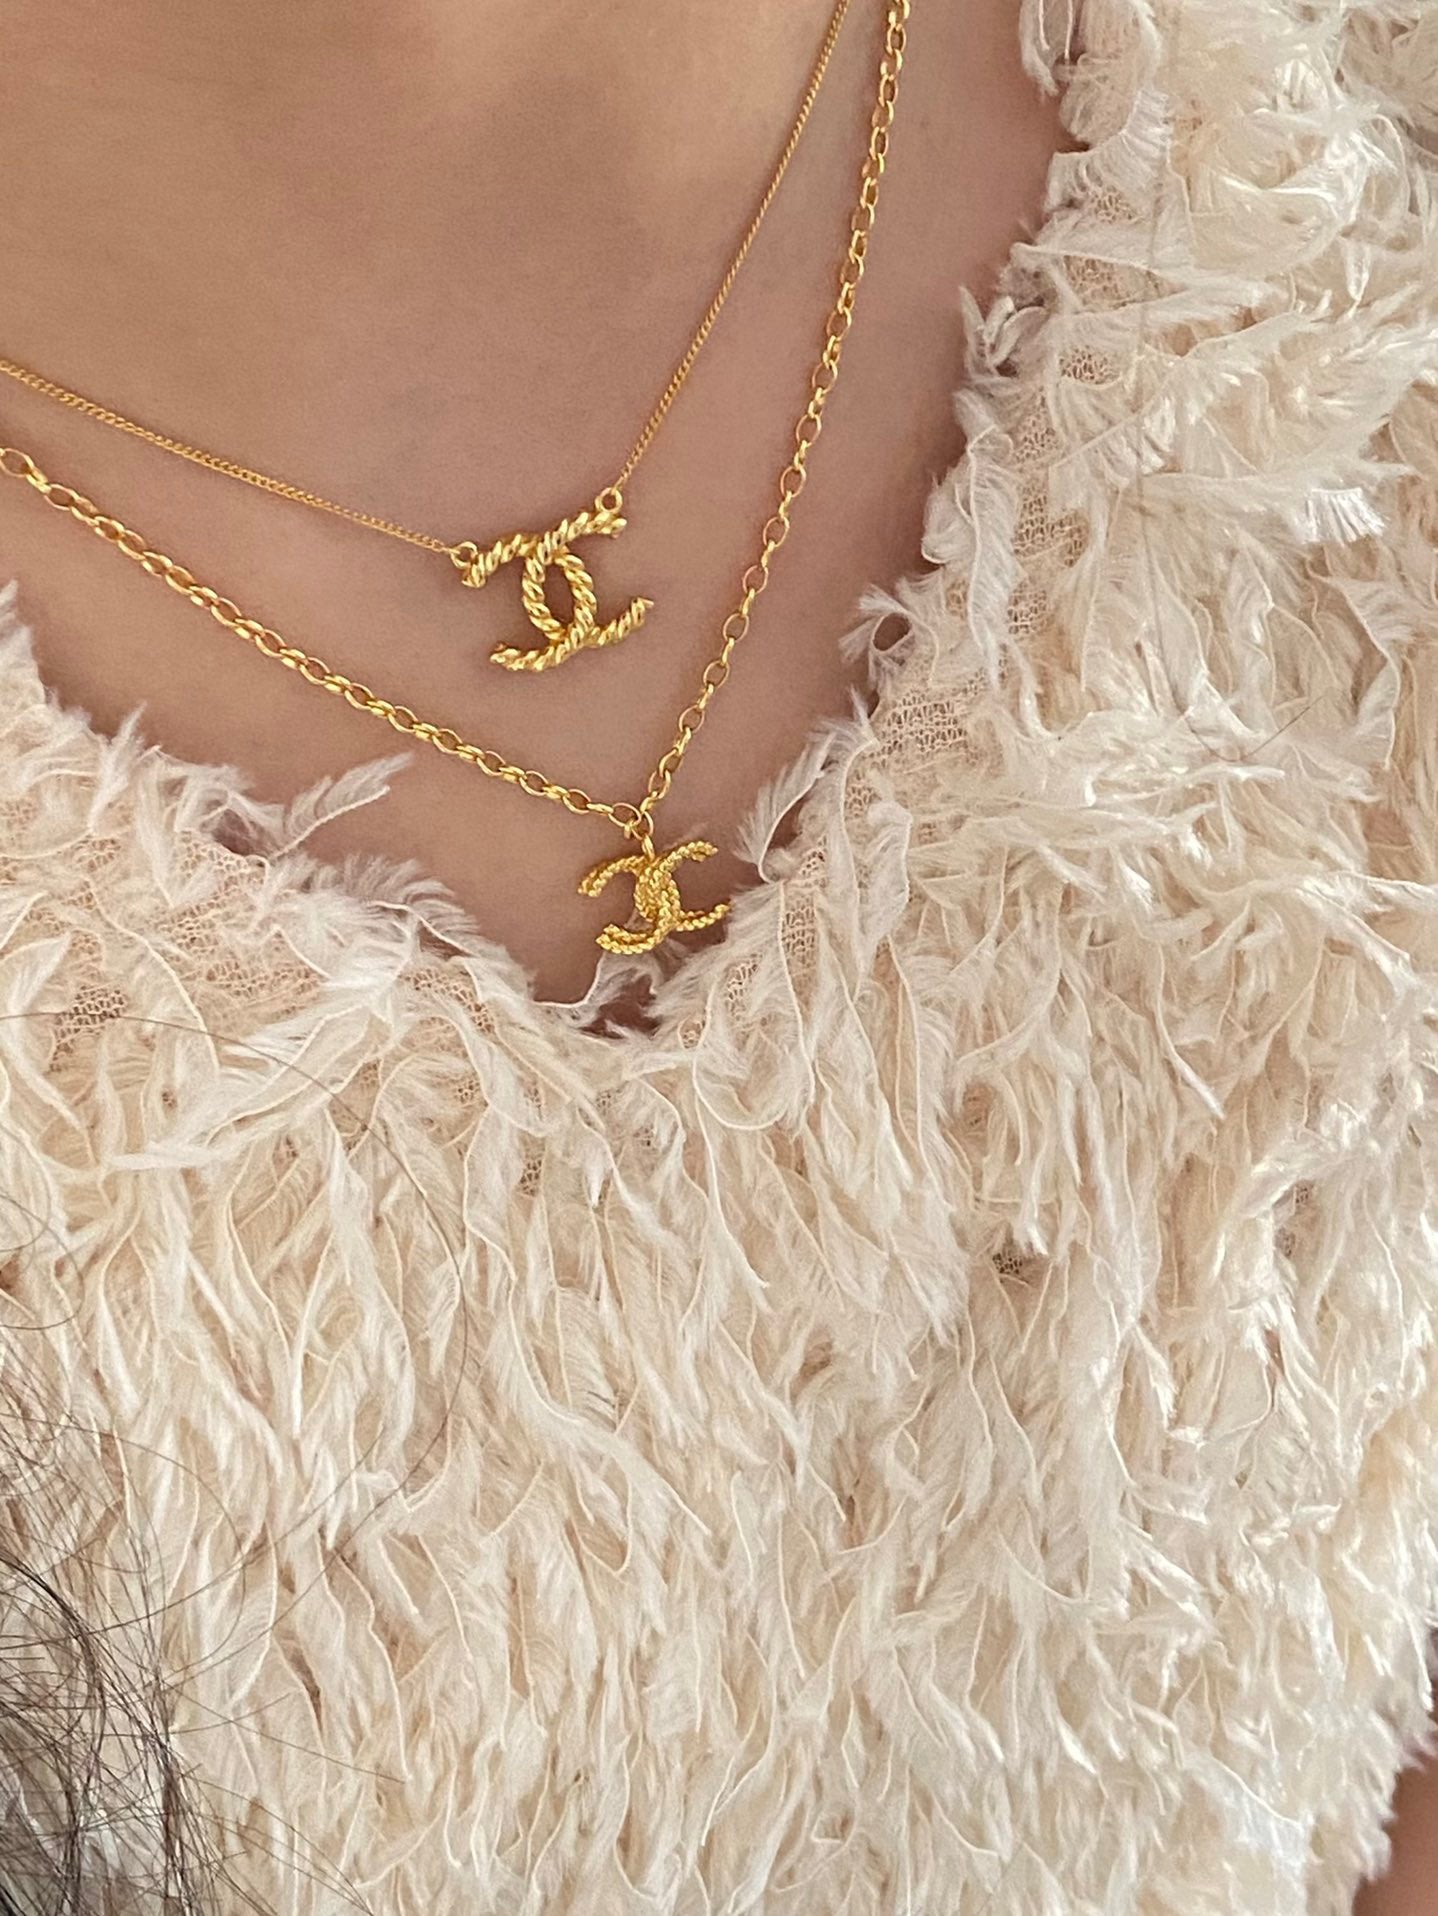 Repurposed Chanel Gold Necklace